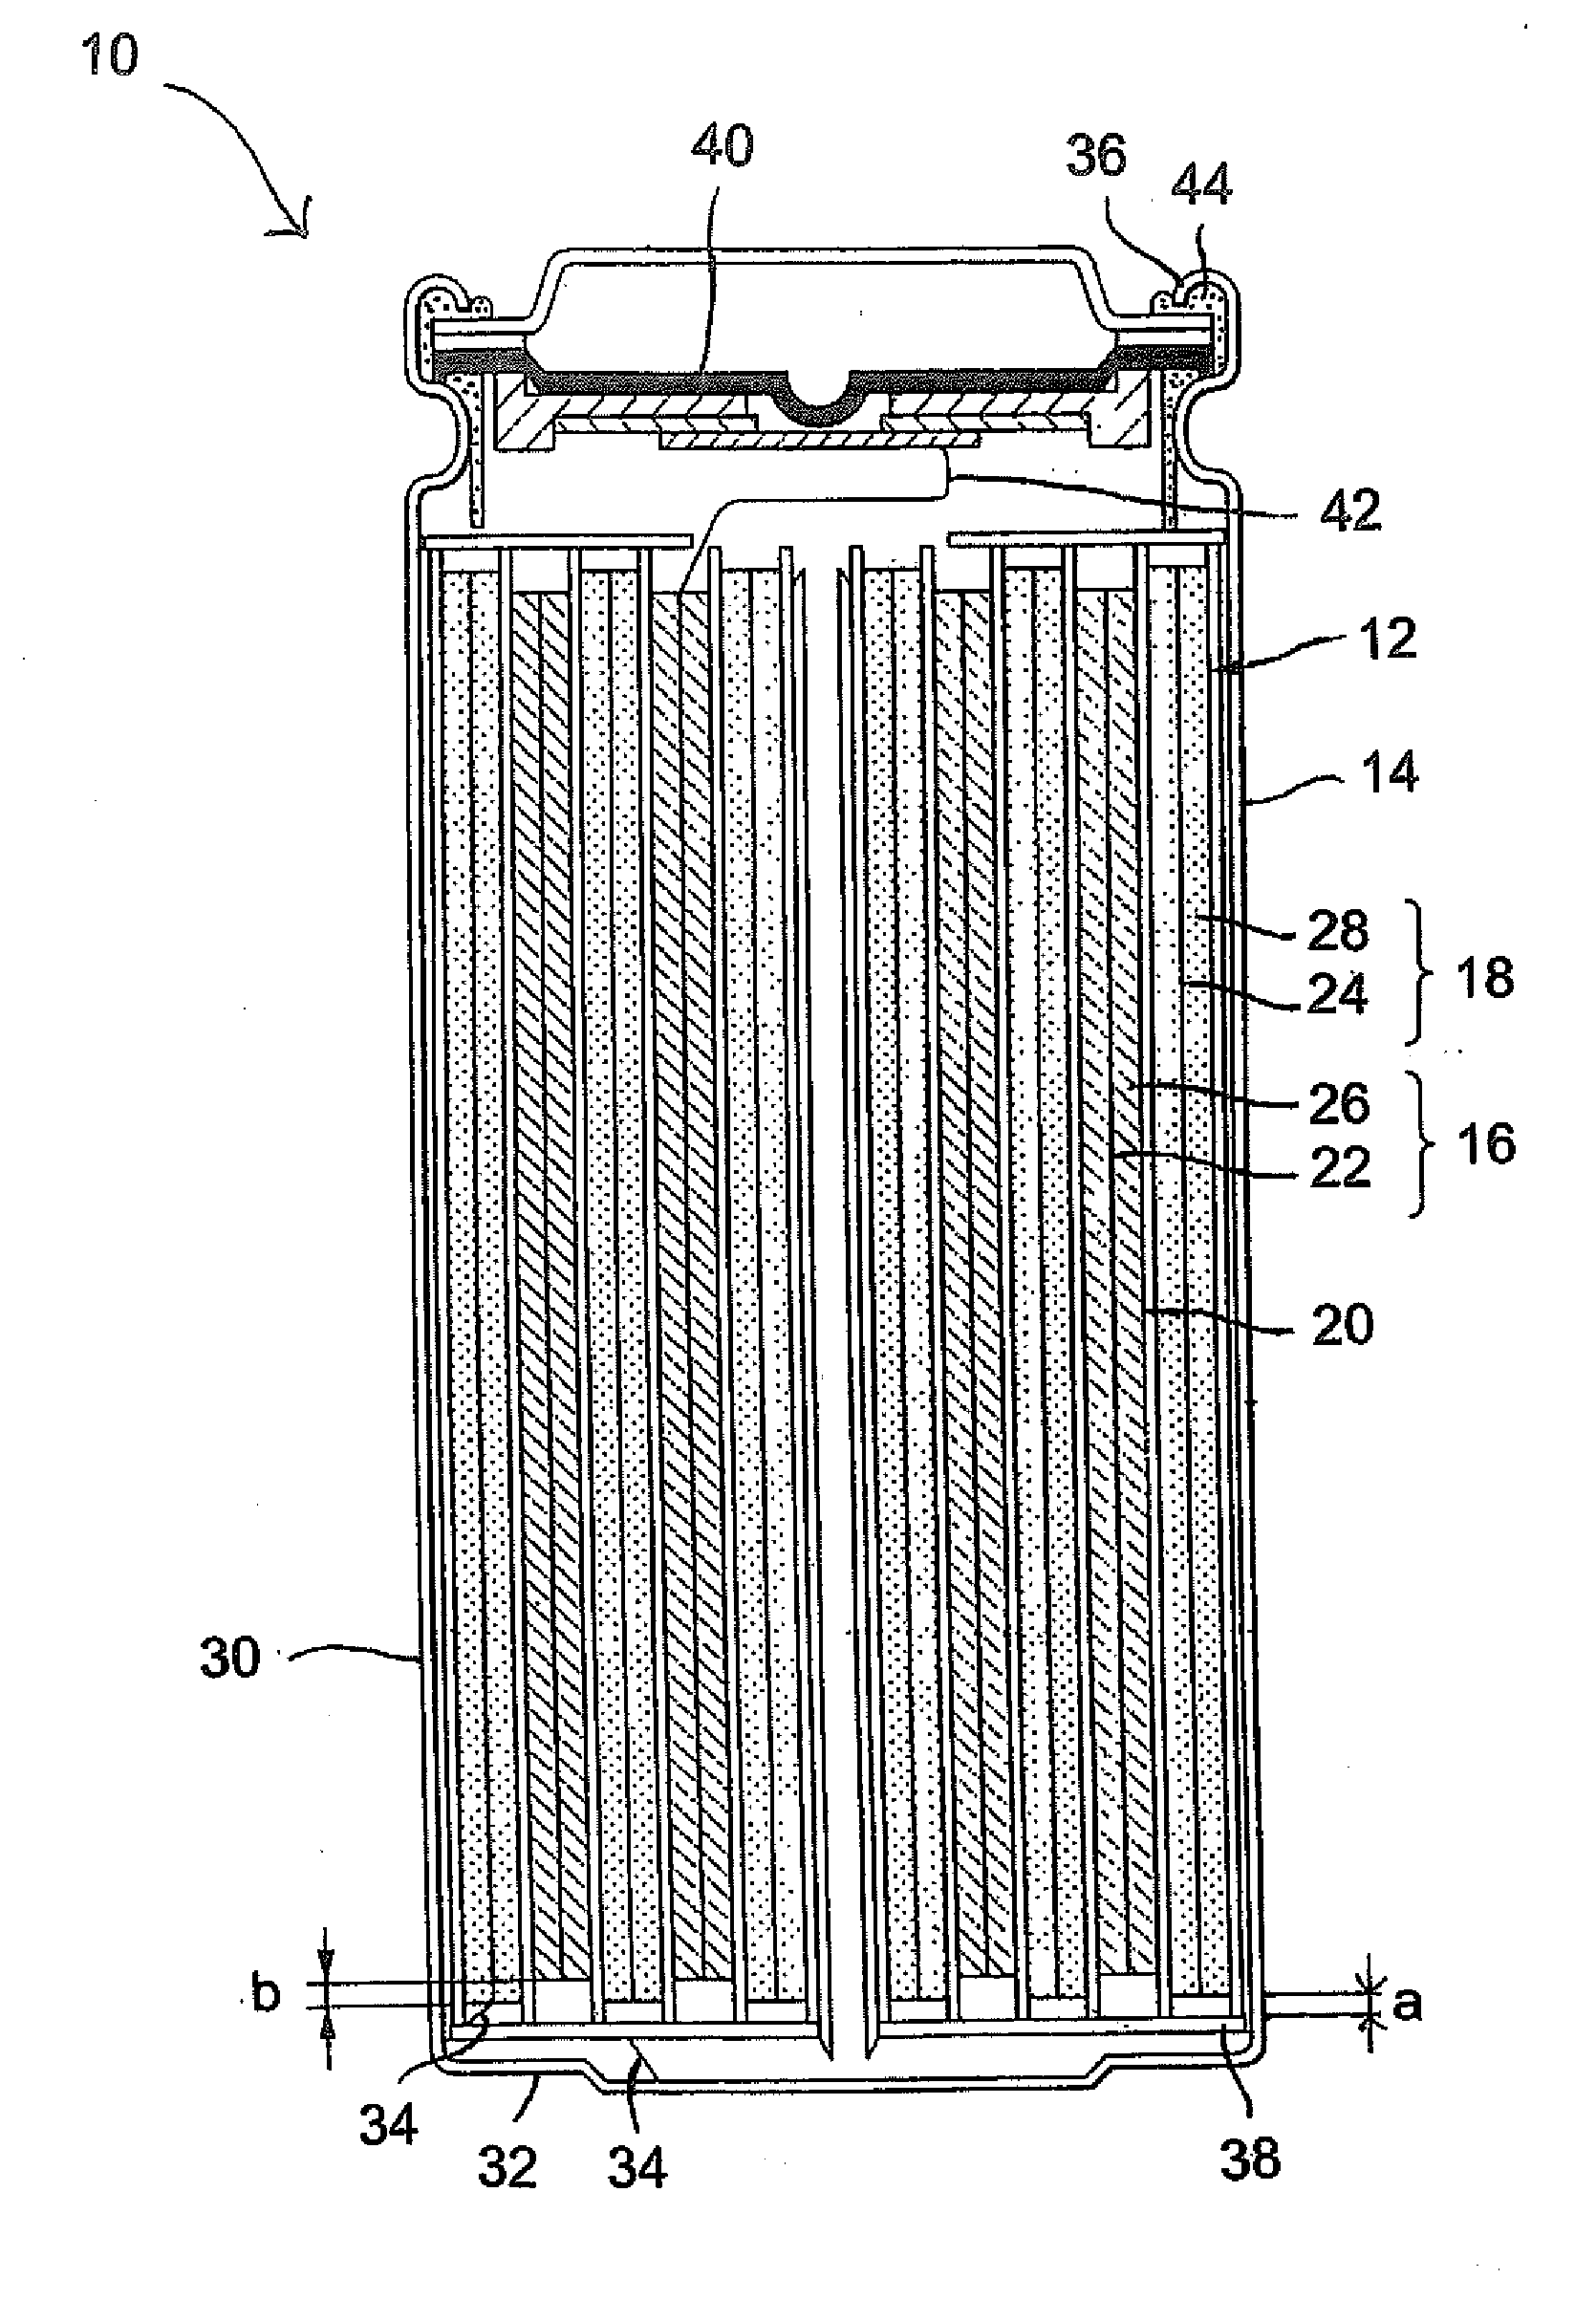 Secondary electrochemical cell